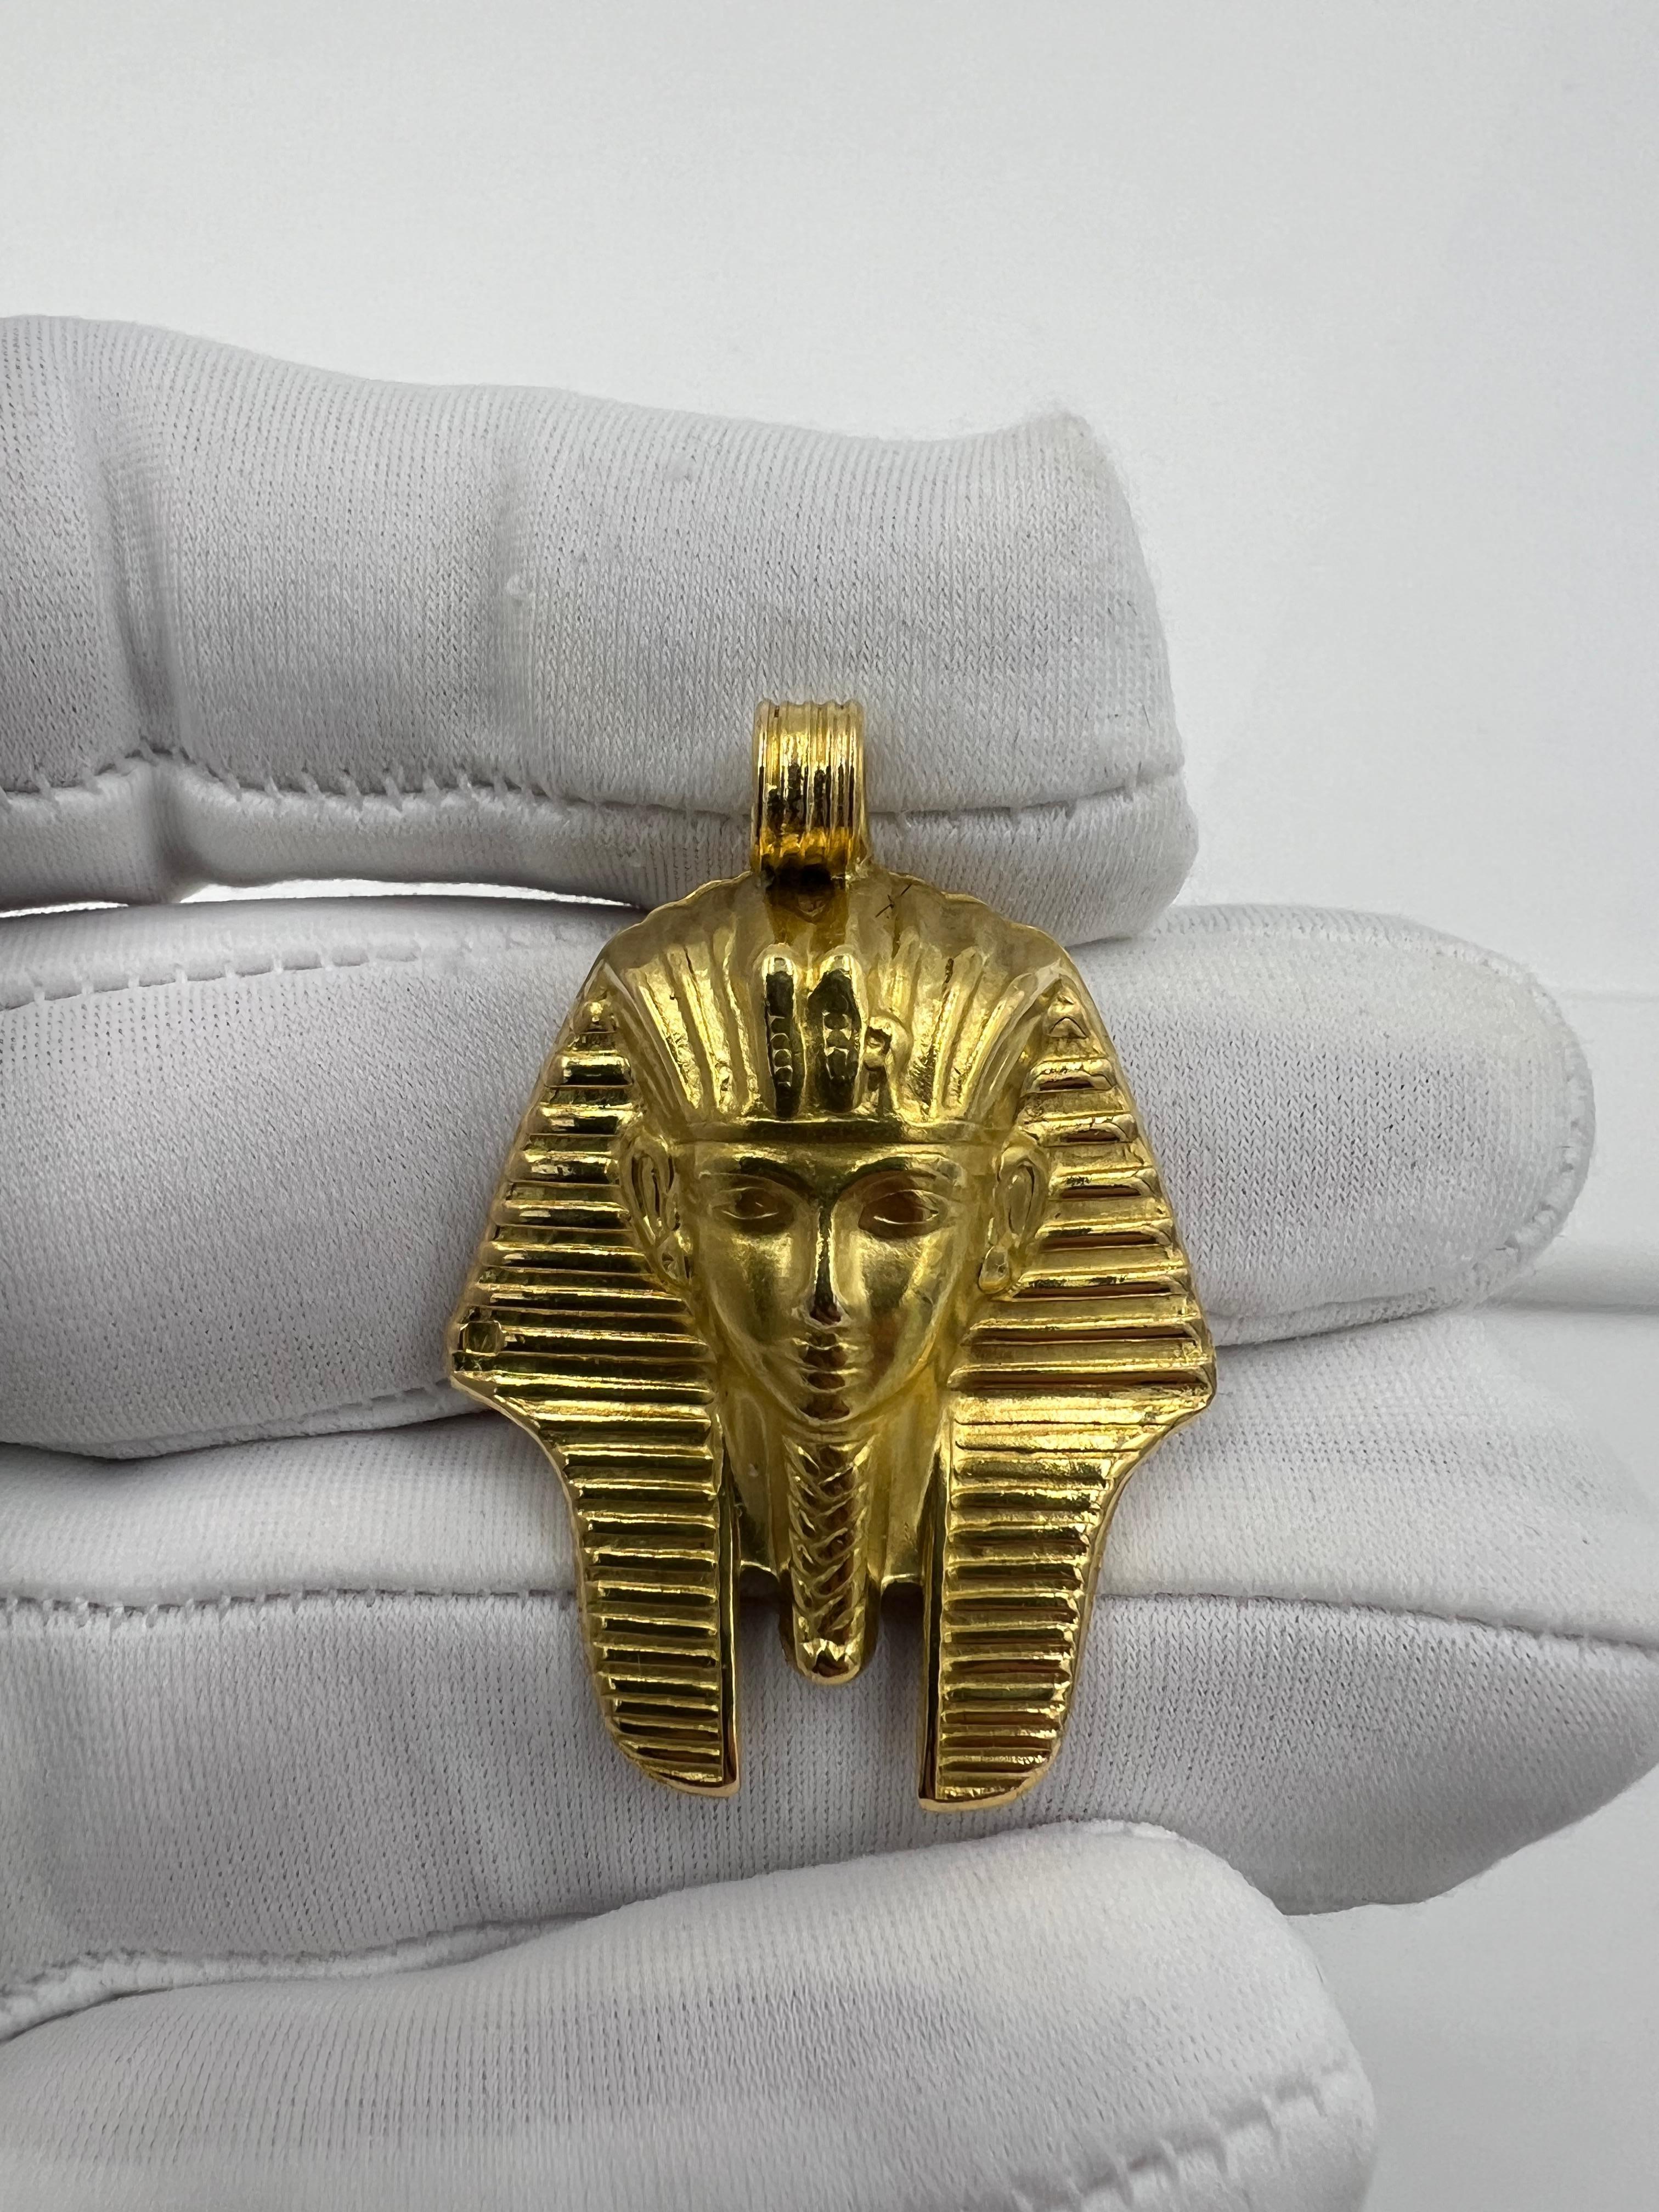 Egyptian Revival Yellow Gold Pendant

ABOUT THIS ITEM: P-DJ1030I  This Egyptian Revival Yellow Gold Pendant Of King Tut is a stunning piece of jewelry that not only embodies the rich history and culture of ancient Egypt but also serves as a timeless